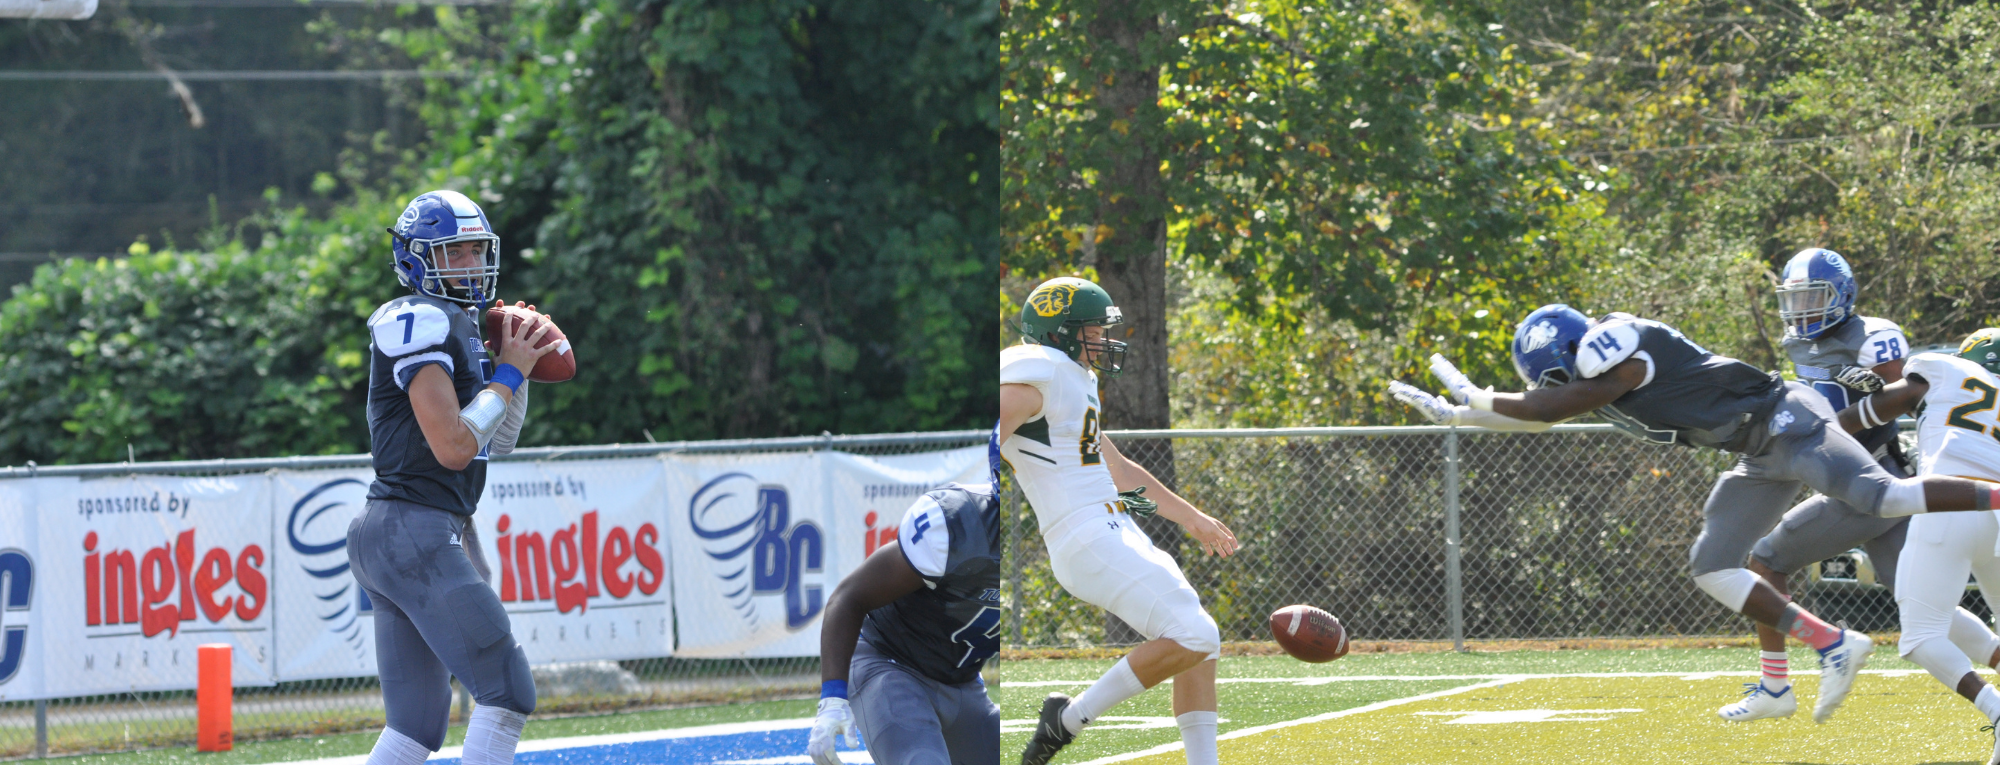 Brevard College's Dalton Cole (left) and Trevon Charles (right) performing in BC's 41-36 victory over Methodist in 2018 (Photos courtesy of Tommy Moss).